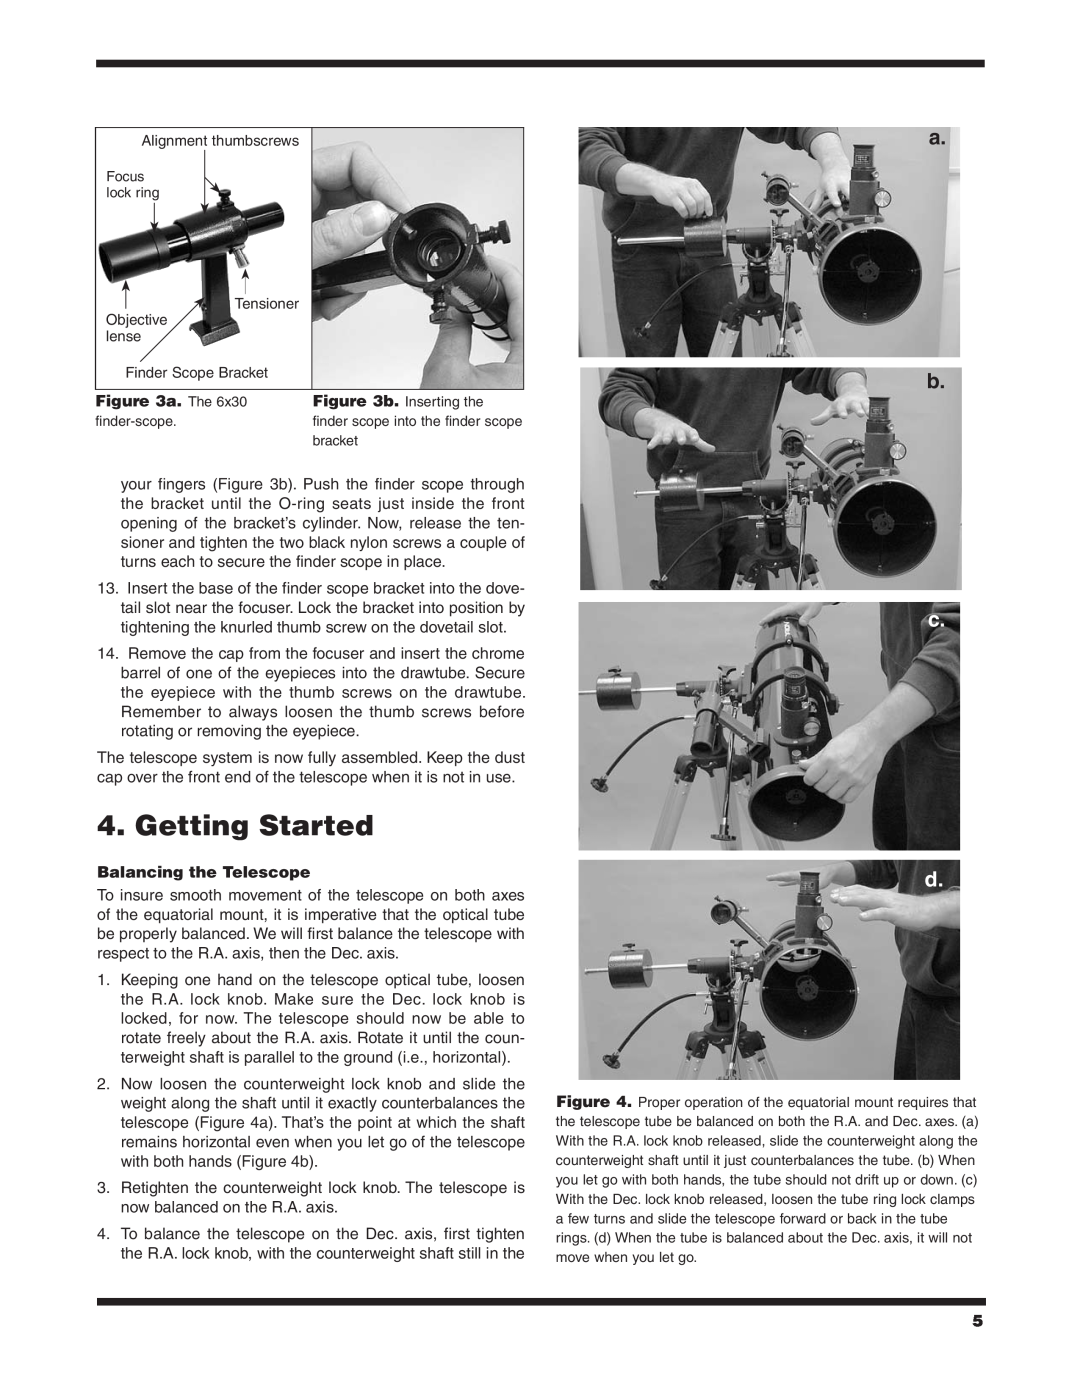 Orion 130ST EQ instruction manual Getting Started, a. The, Balancing the Telescope 